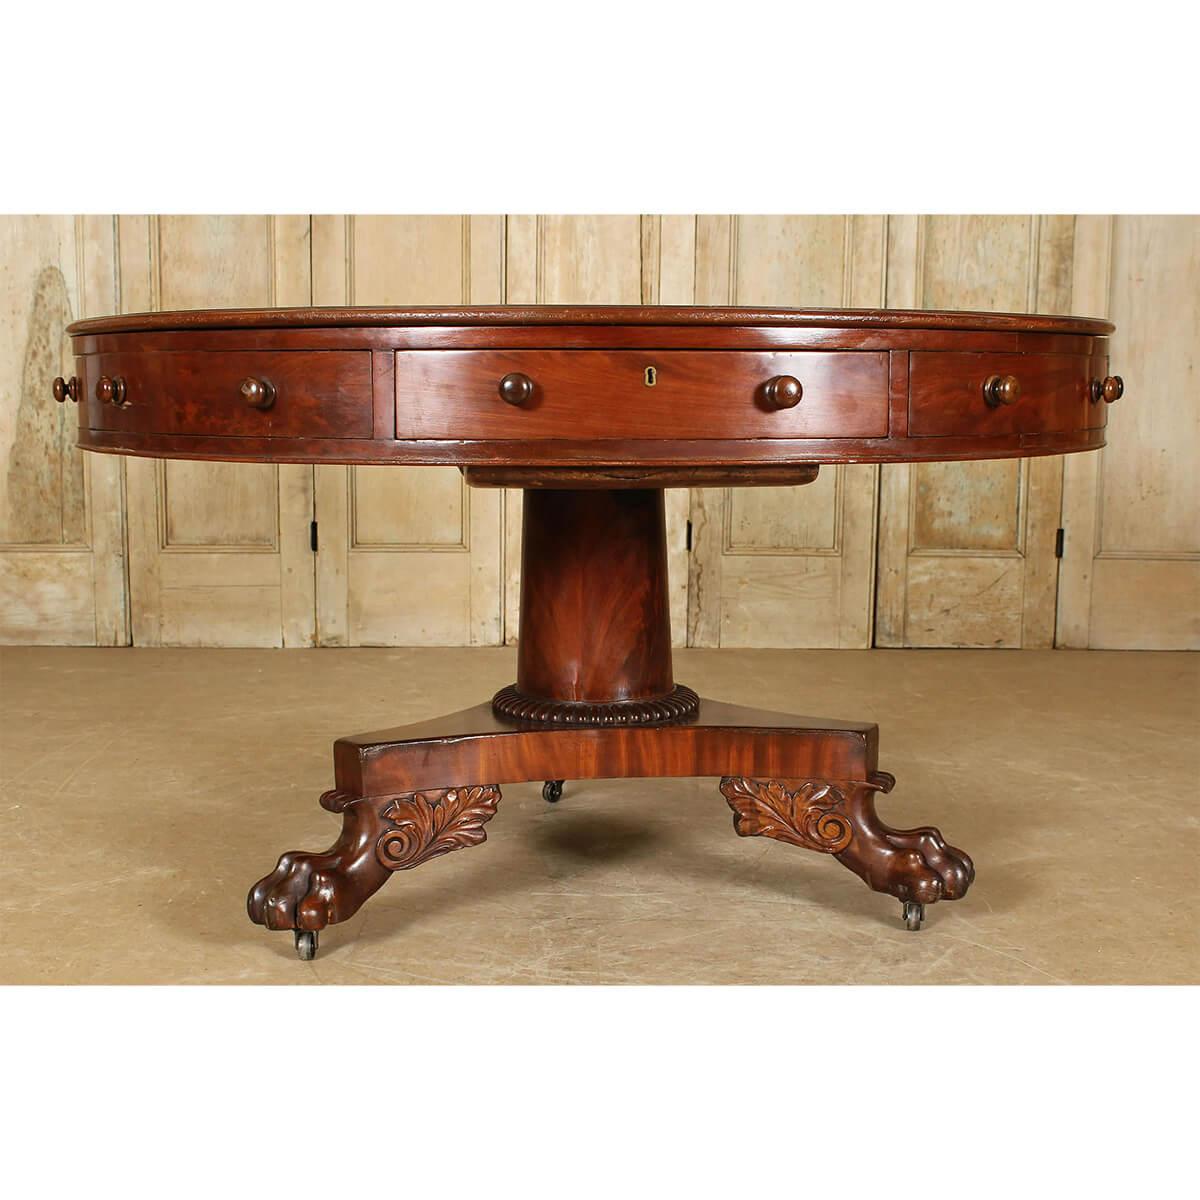 A large late Regency mahogany round drum table with a gilt-tooled leather top, frieze drawers raised on a center pedestal column, and carved lion winged paw feet. Ca 1820

Dimensions: 52.5